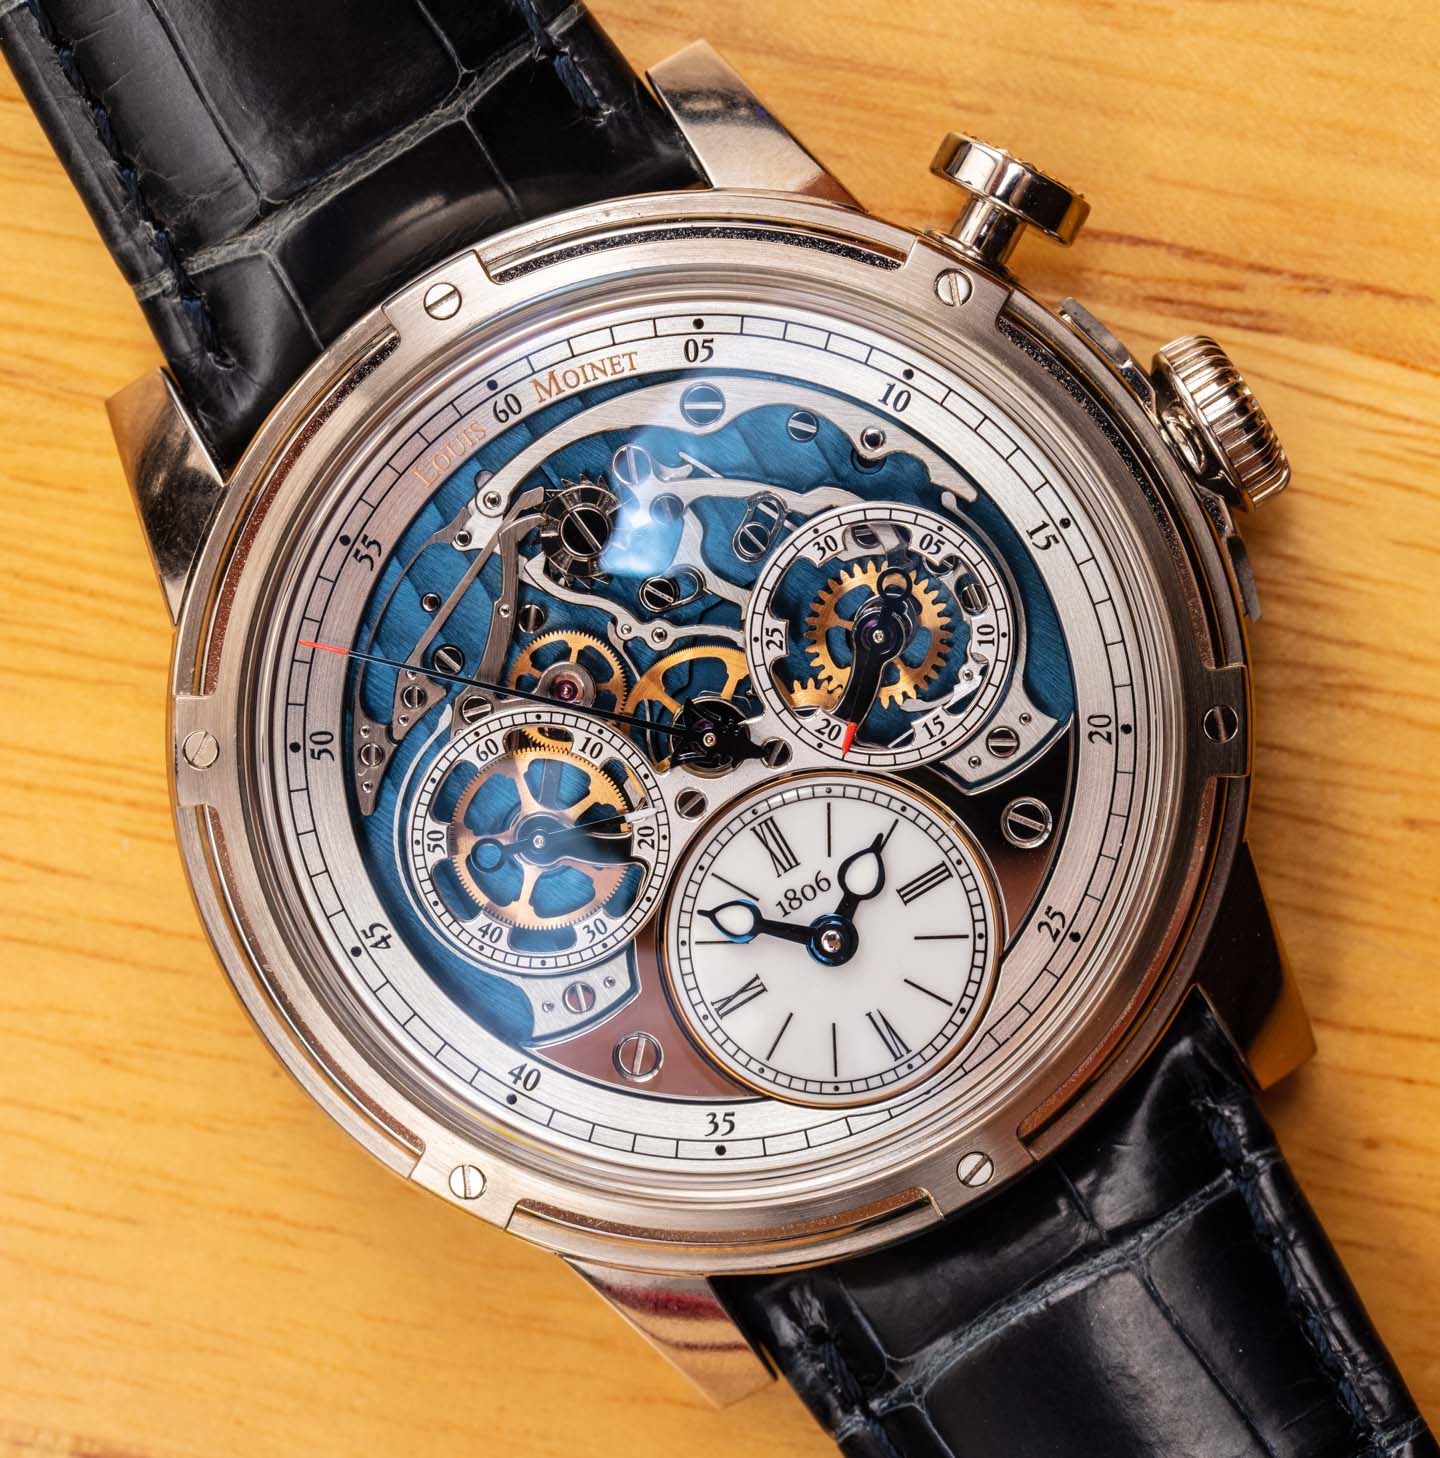 Louis Moinet Meteoris – The Most expensive modern wristwatch, or